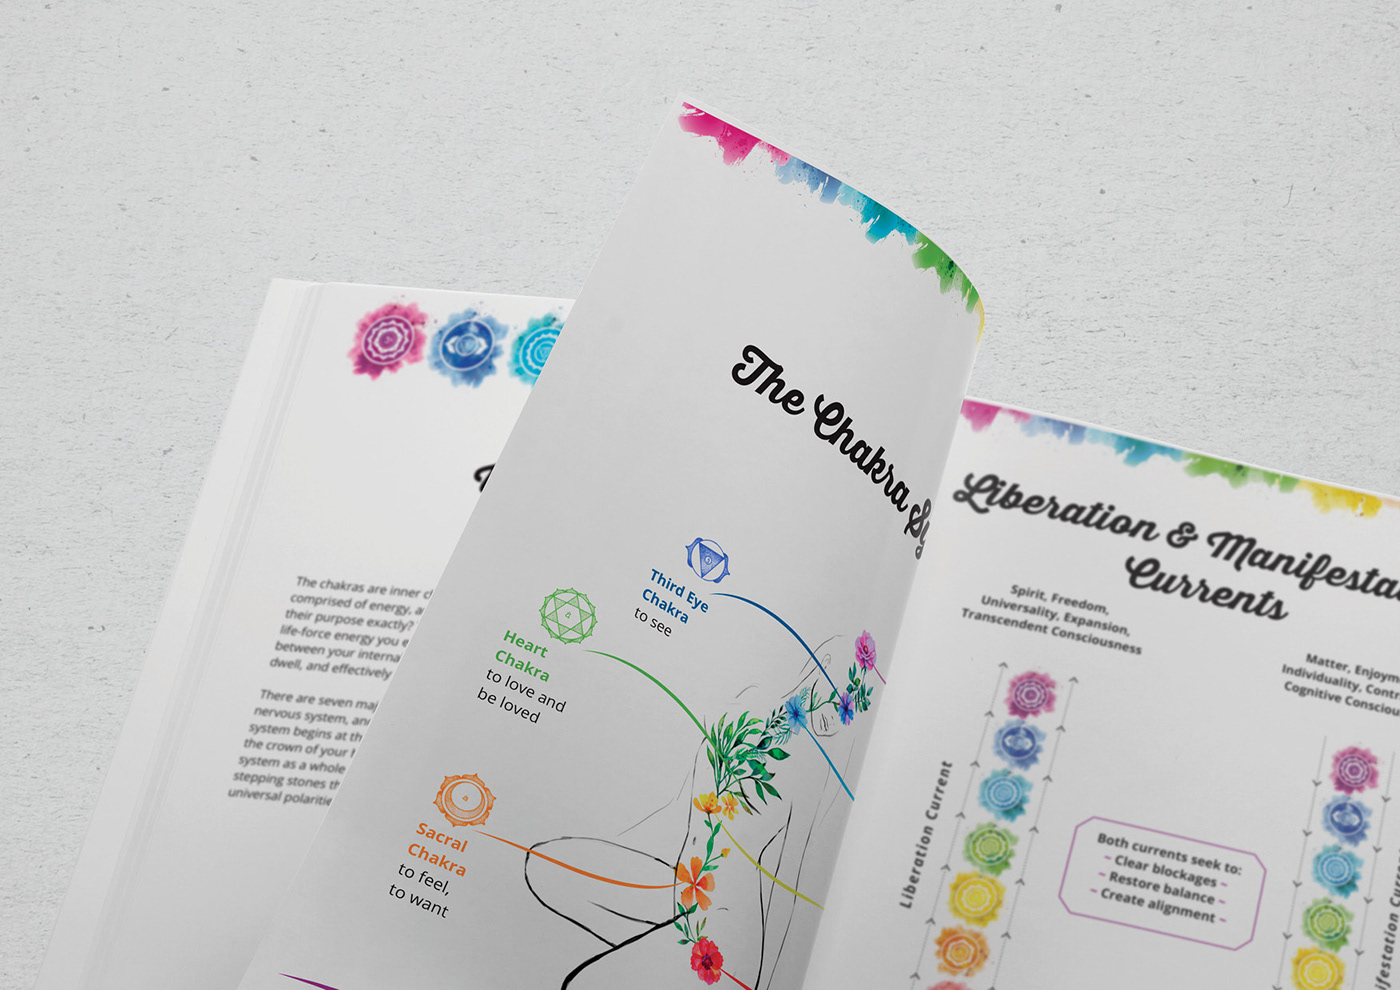 Workbook designed for a week long yoga retreat about manifesting your dream using the chakra system.